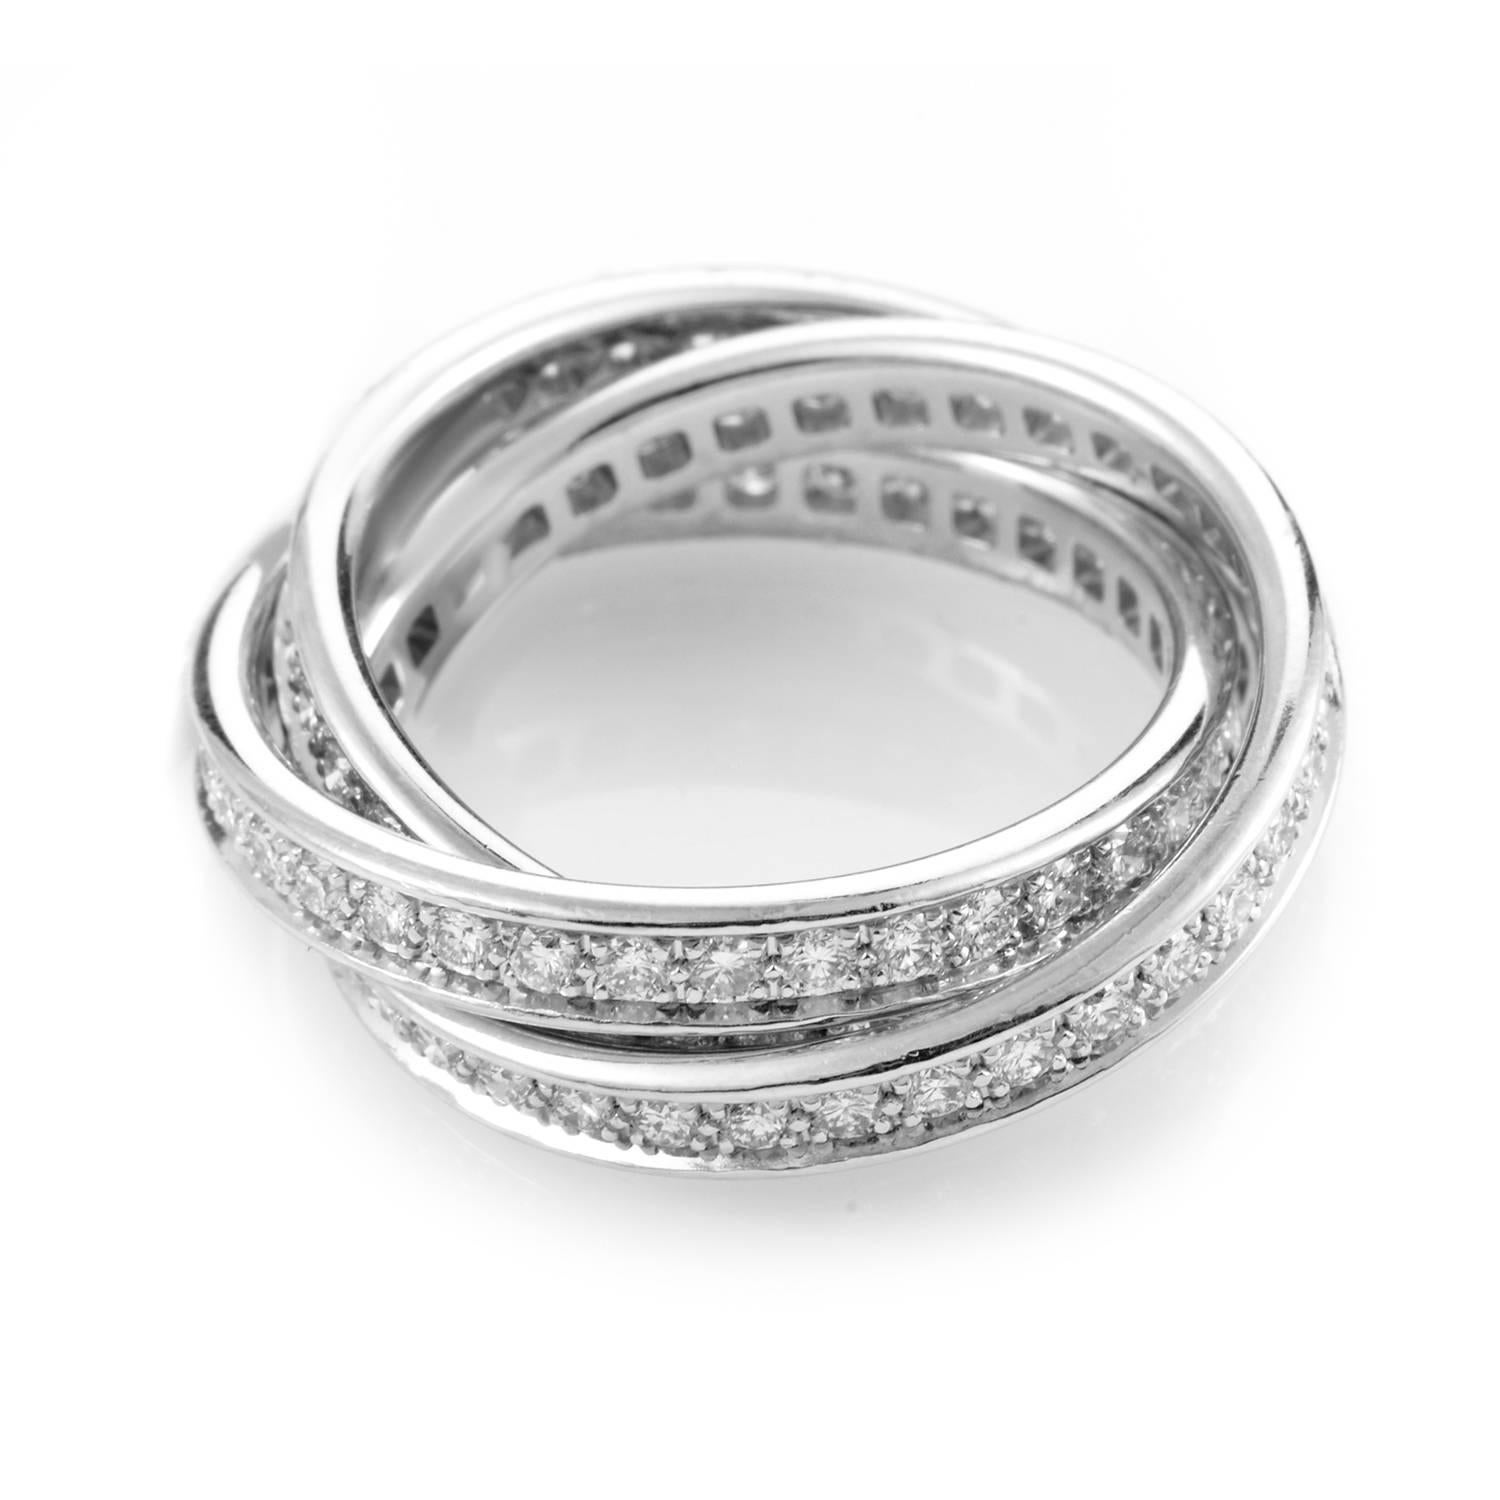 Cartier's Trinity collection is world renowned for symbolizing timeless and never ending love. This three band ring from the collection is made of 18K white gold and is set with glittering white diamonds. Absolutely gorgeous!
Included Items: